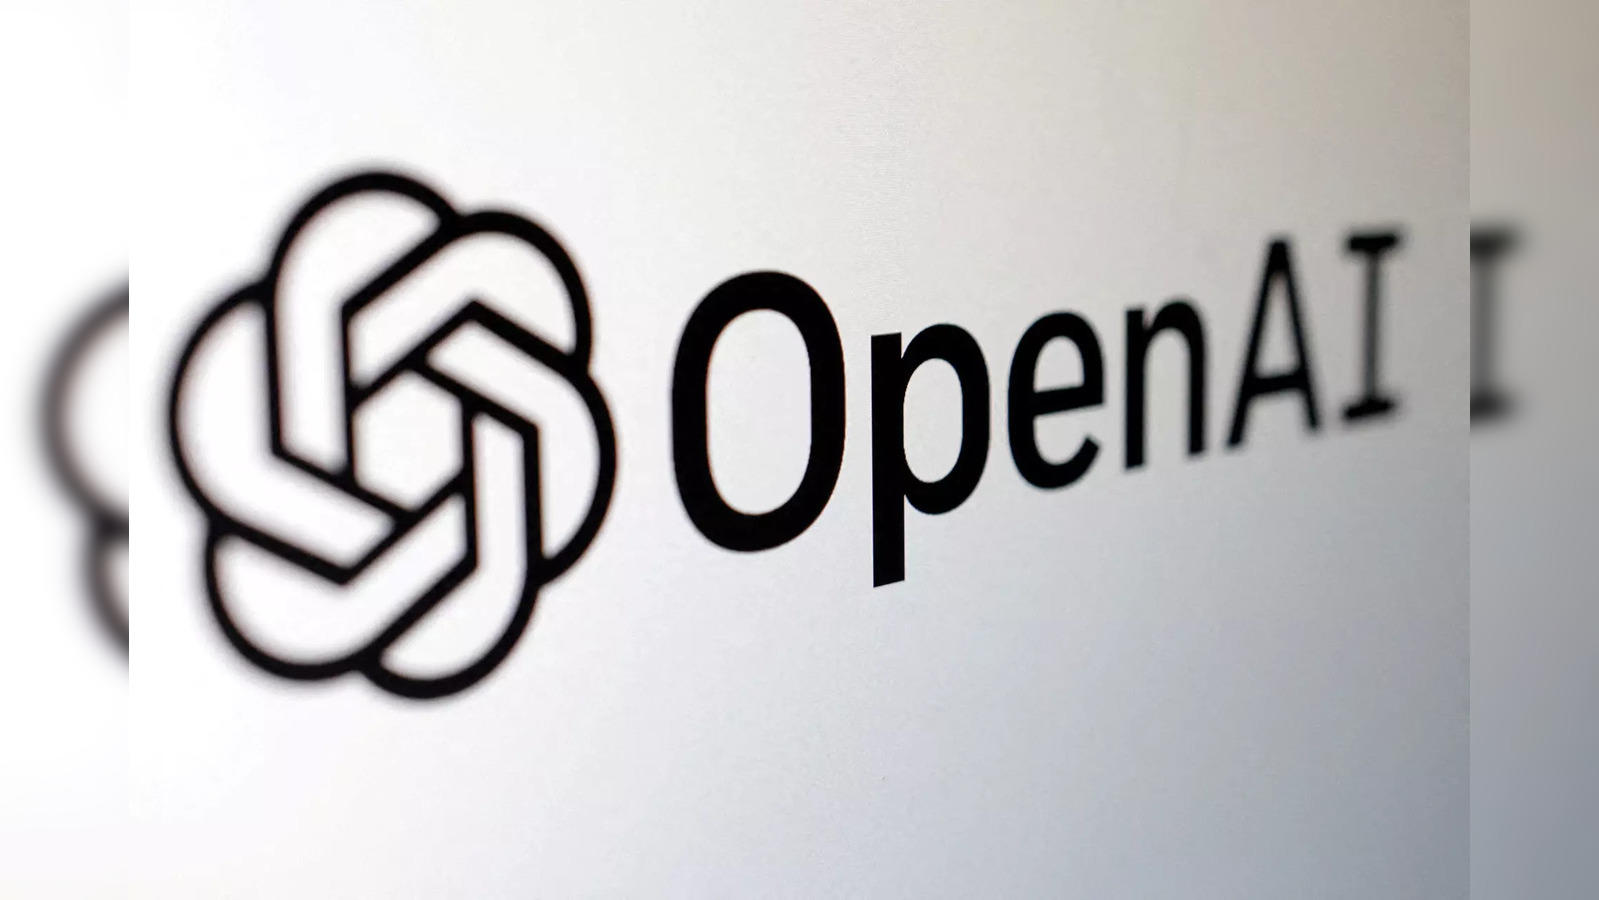 OpenAI/Microsoft: non-profit's mission is at odds with its biggest